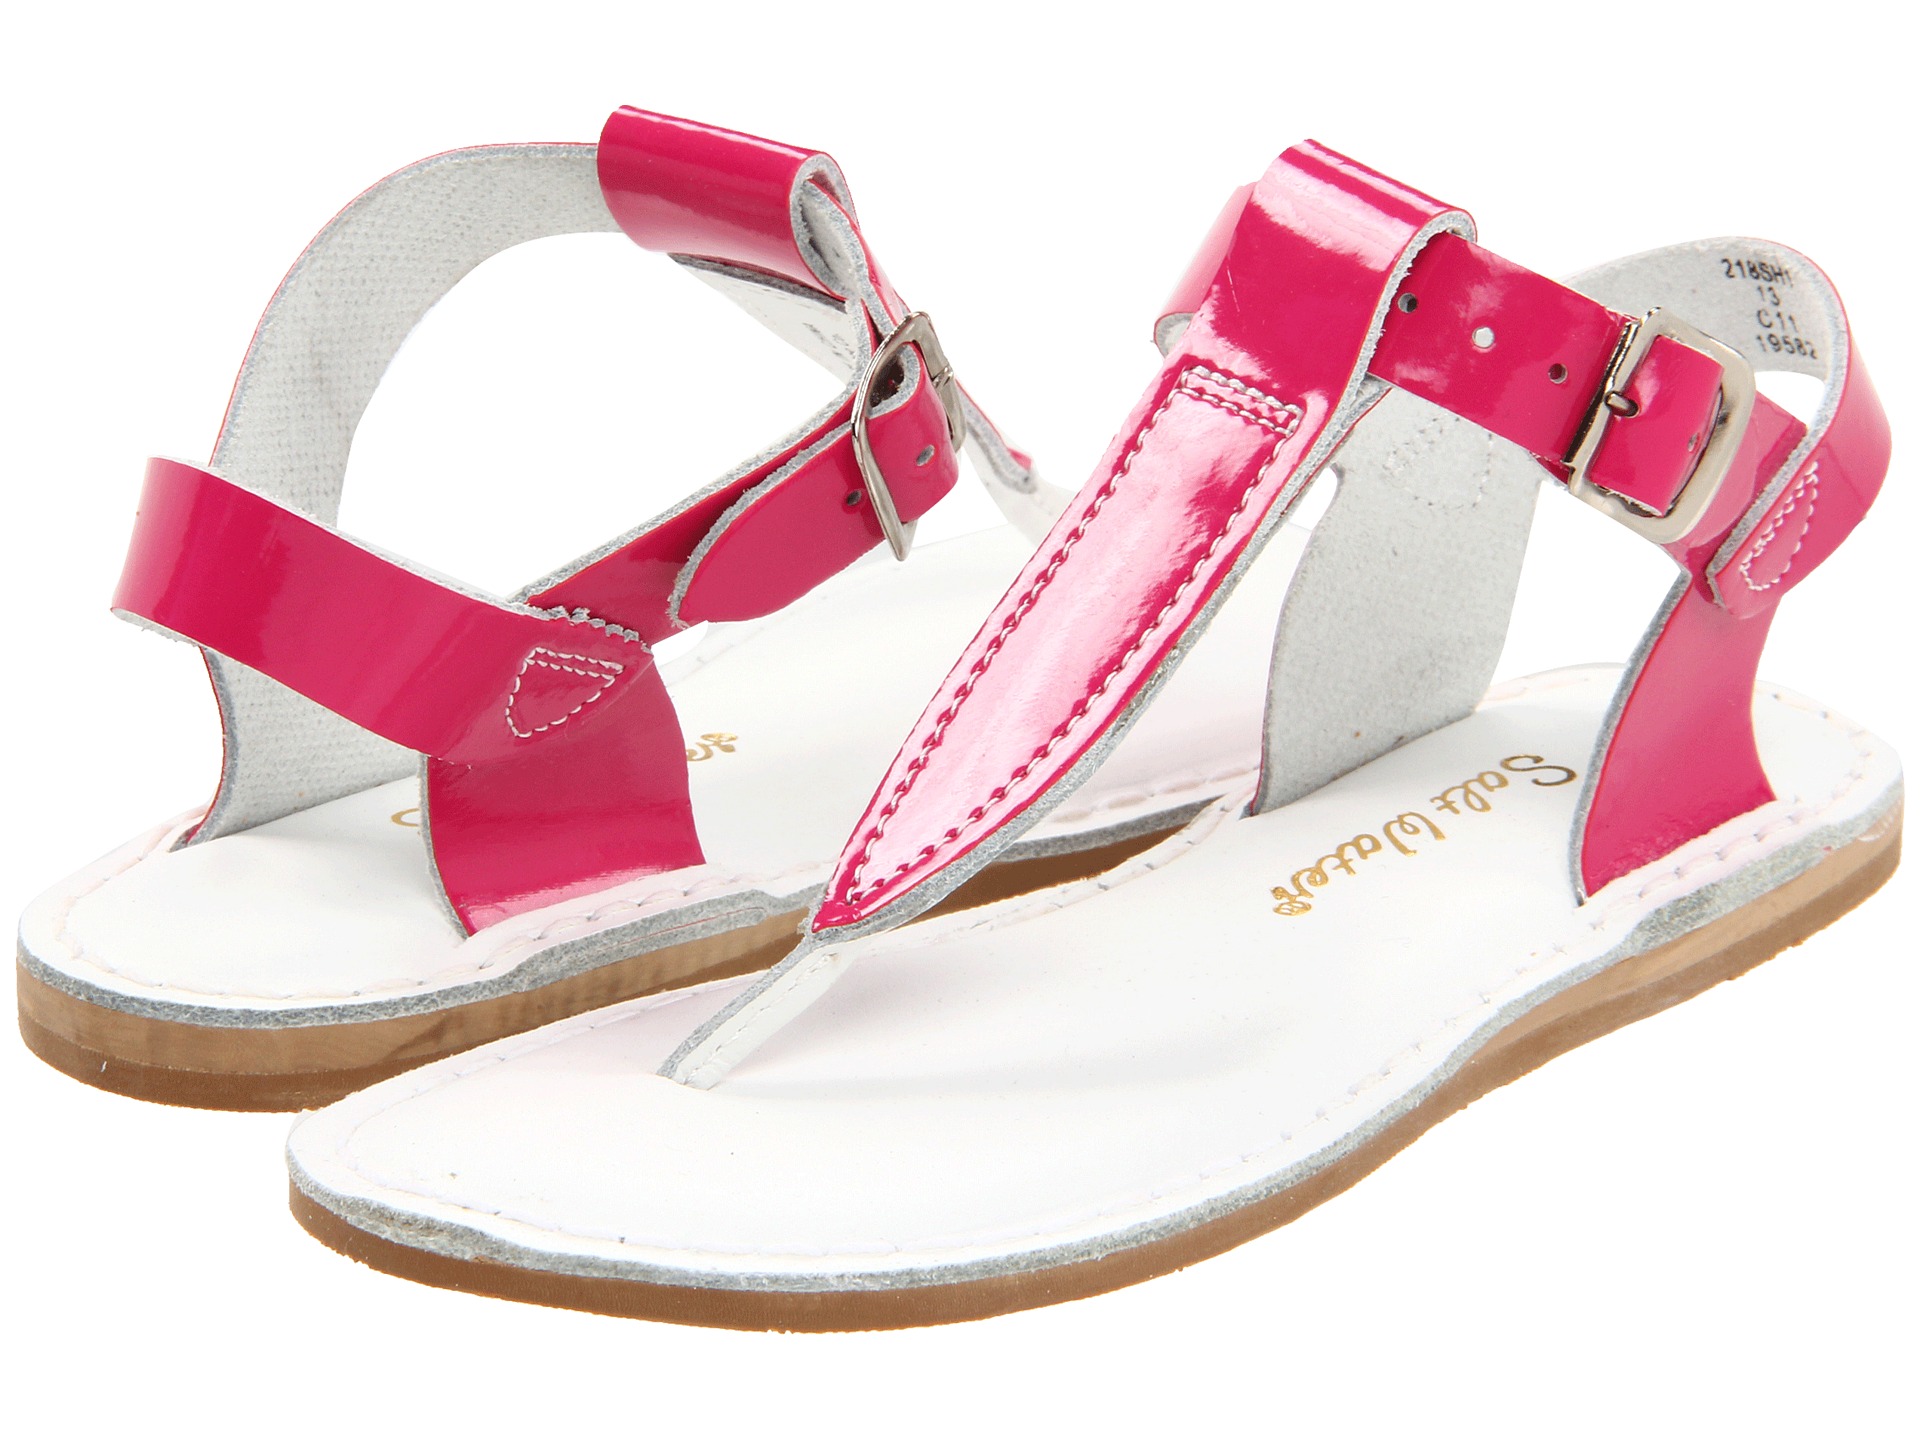 Salt Water Sandal by Hoy Shoes Sun San   T Thongs (Toddler/Youth) $42 